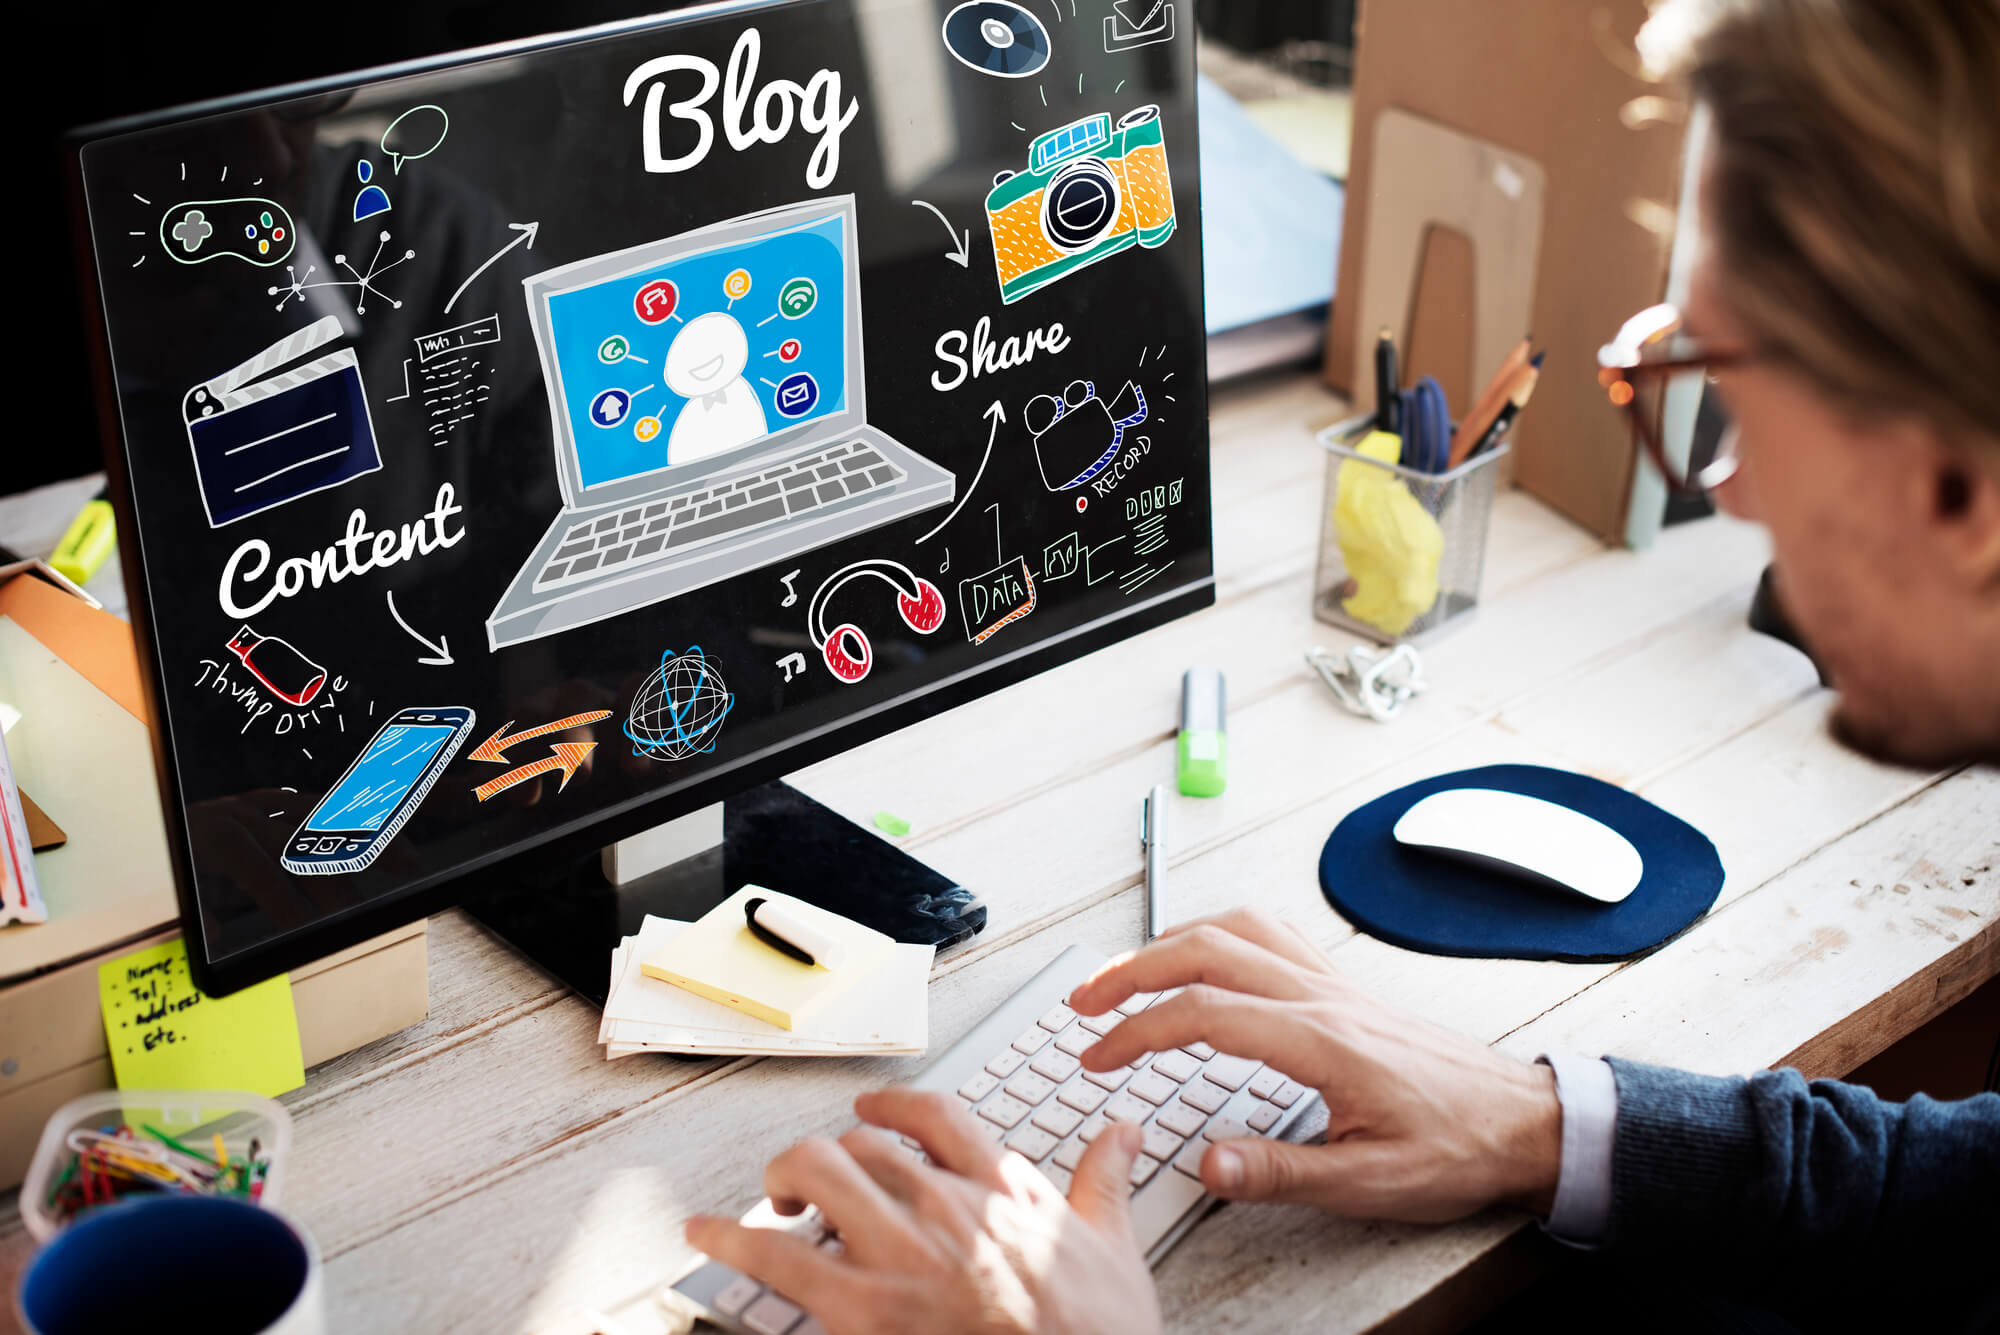 The pros and cons of blogging